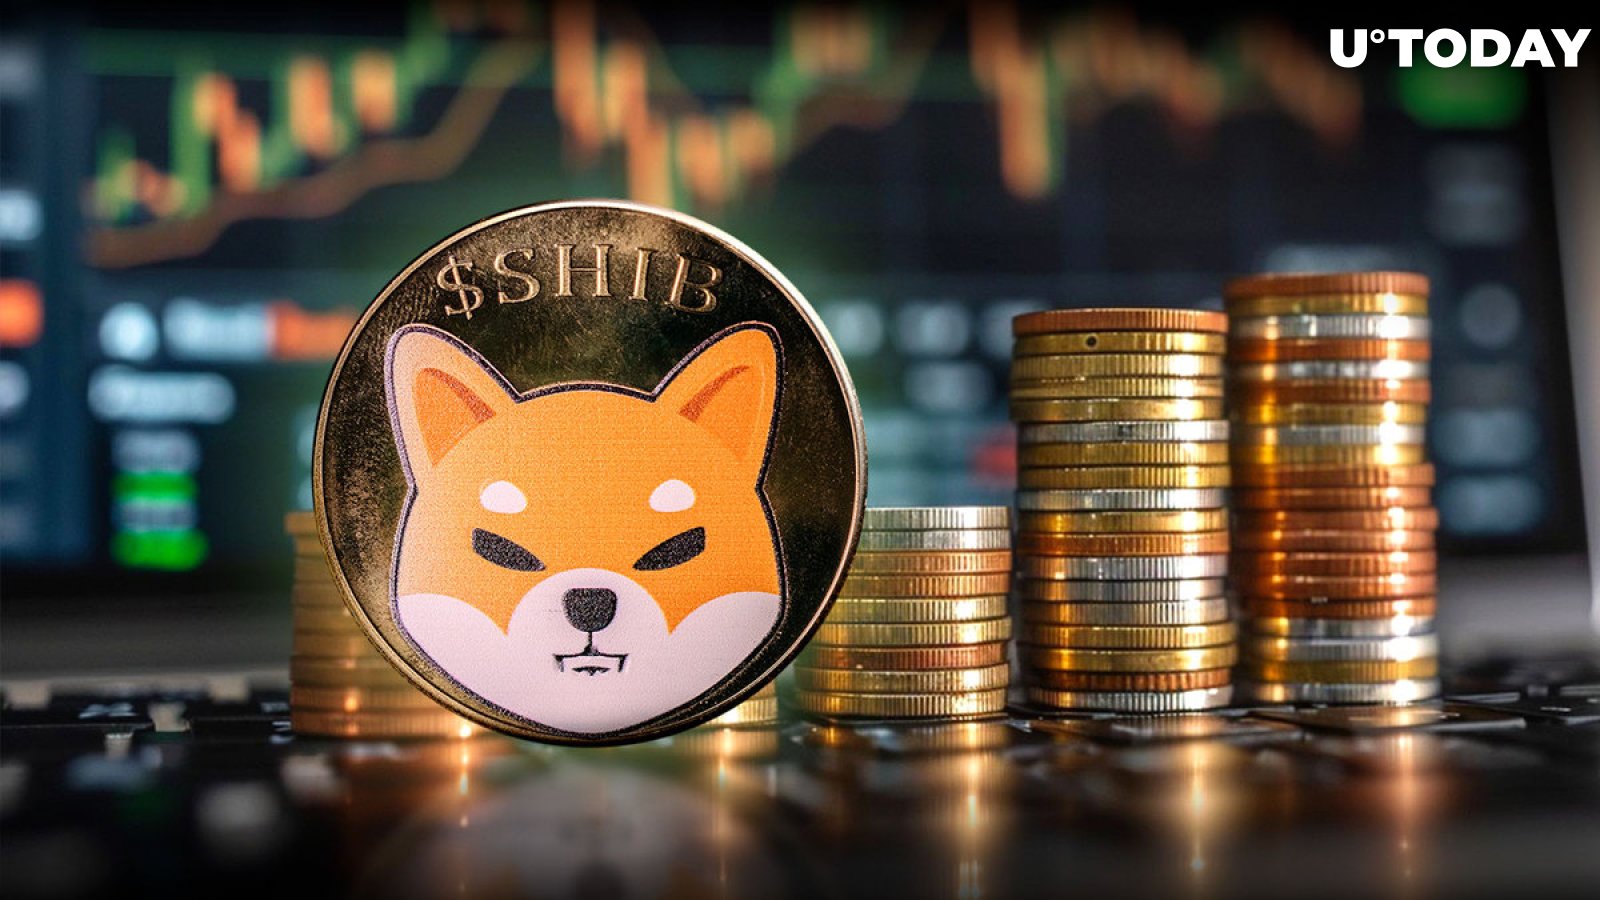 600 Billion Shiba Inu (SHIB) Tokens in 24 Hours: Where Does It All Go?